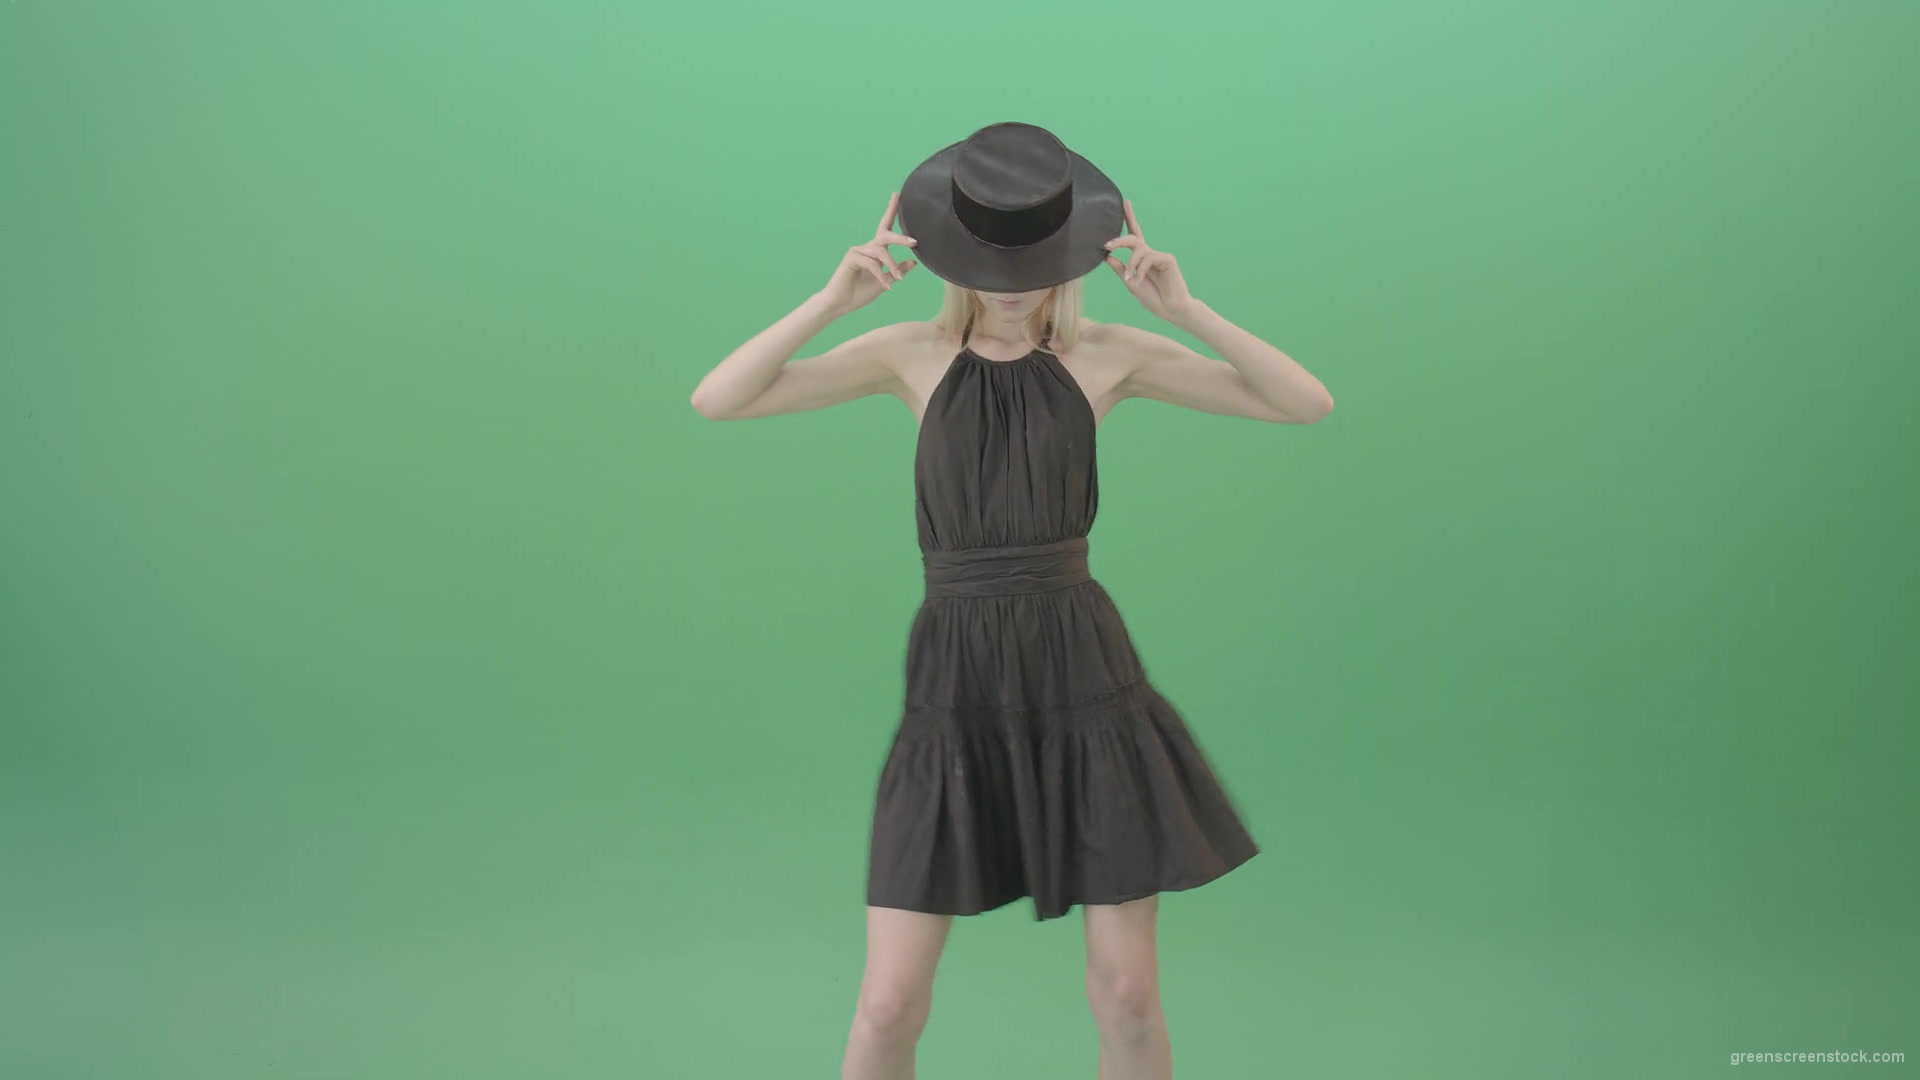 Elegant-girl-in-black-dress-and-hat-chilling-dance-isolated-on-green-screen-4K-Video-Footage-1920_008 Green Screen Stock